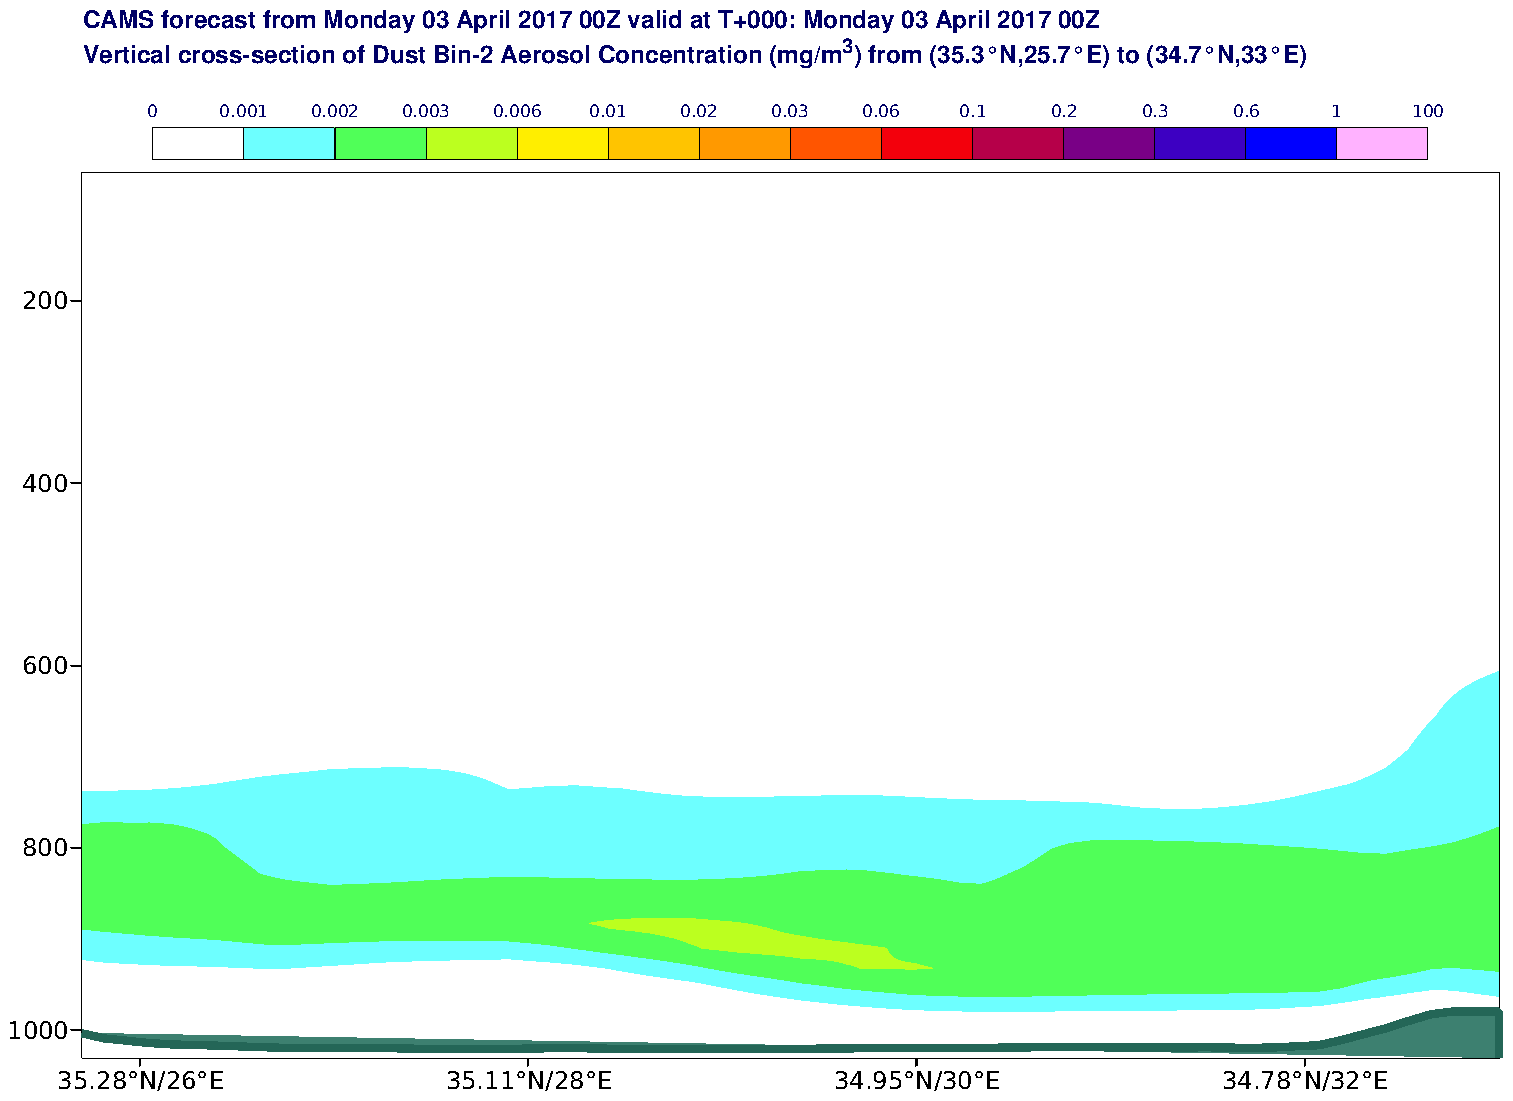 Vertical cross-section of Dust Bin-2 Aerosol Concentration (mg/m3) valid at T0 - 2017-04-03 00:00